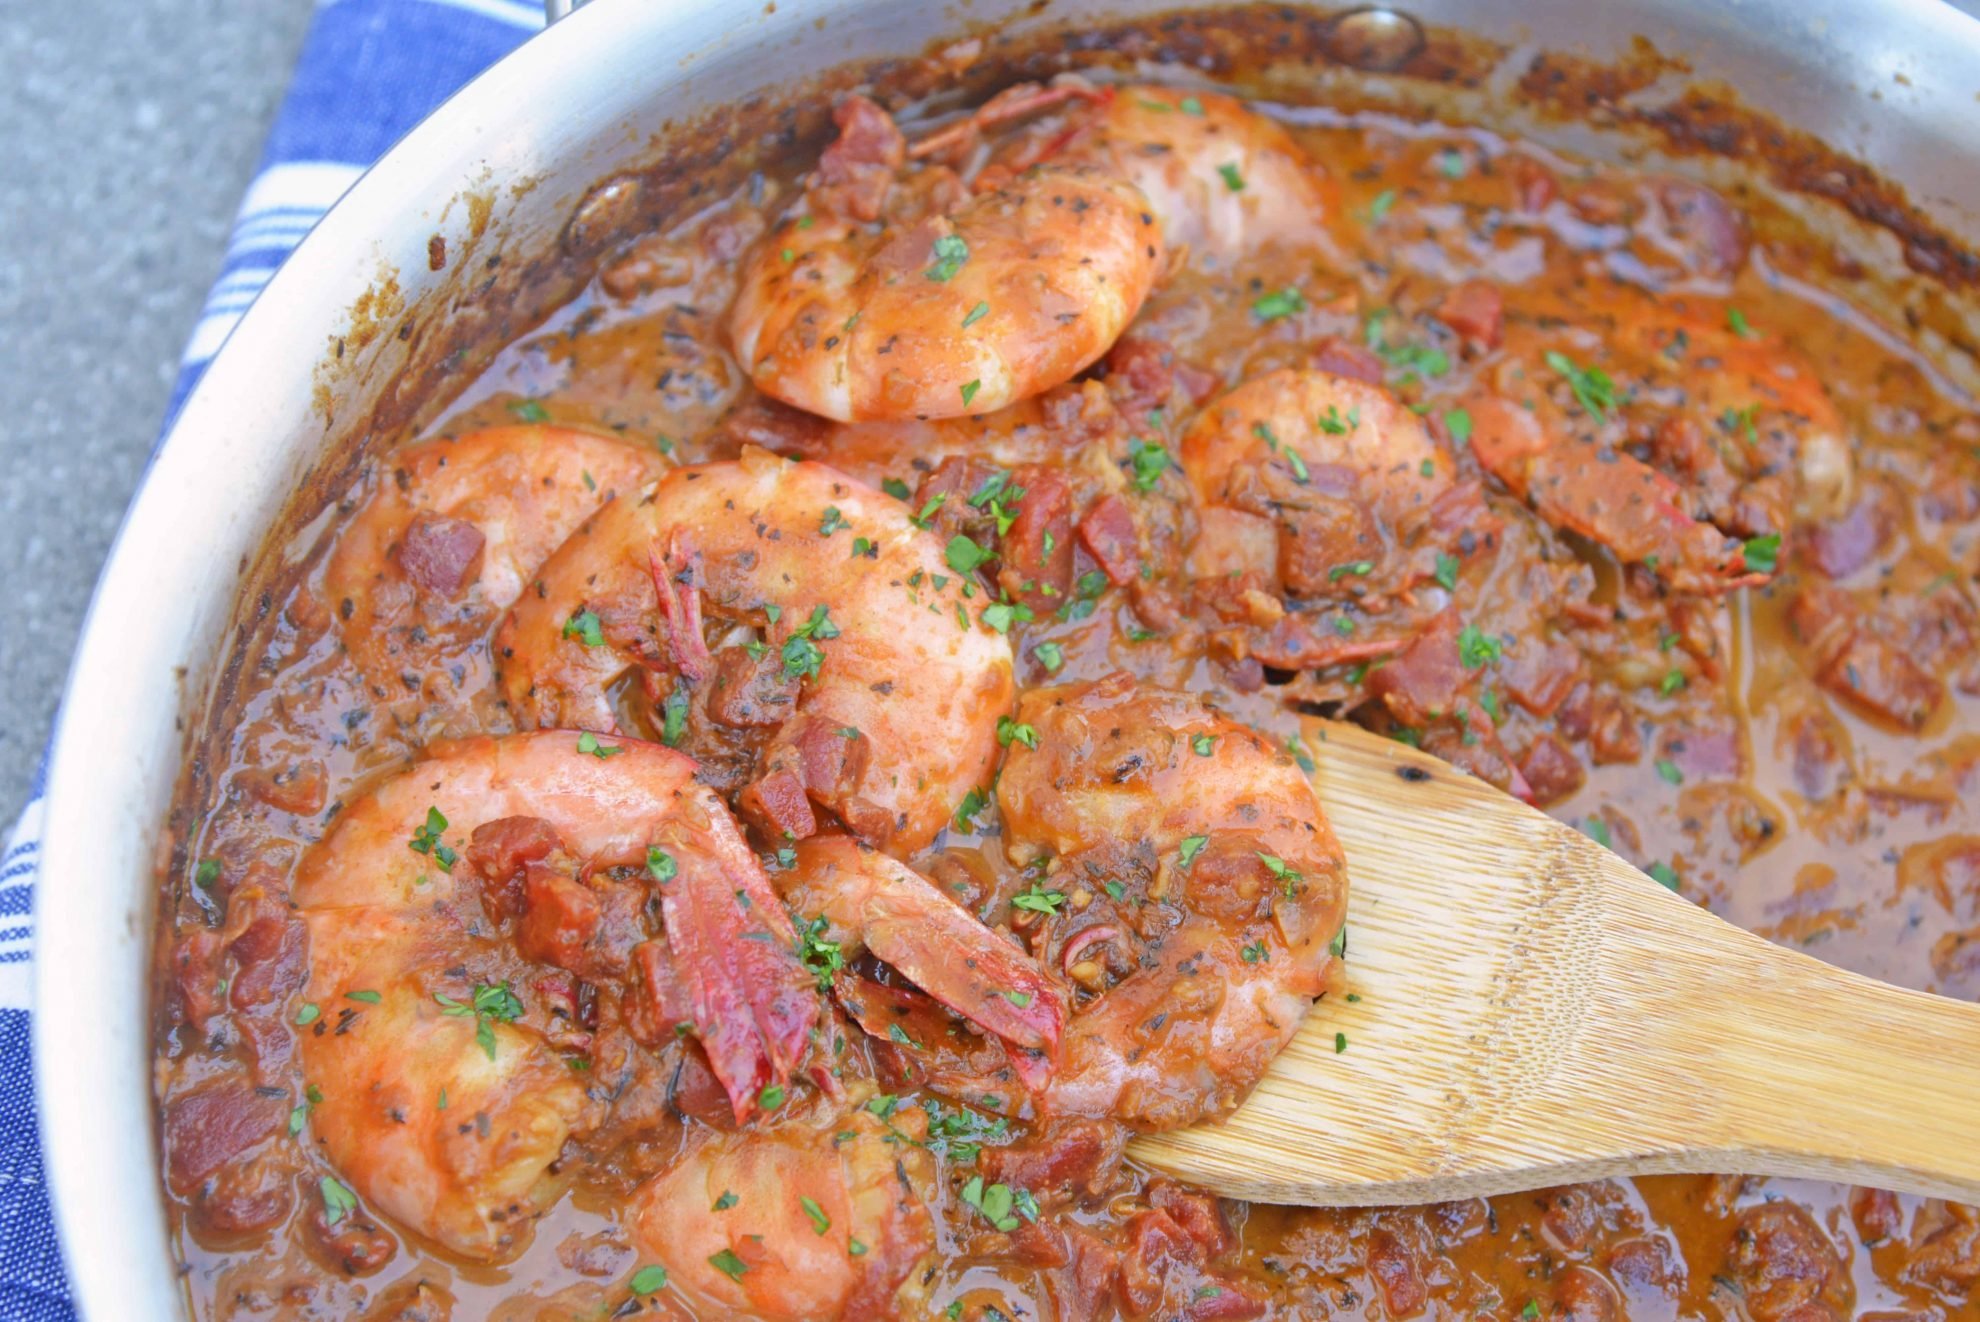 Voodoo Shrimp Creole is a tomato-based dish using shrimp and beer to make a sweet and spicy broth. Serve over rice or grits for a full meal. #voodooshrimp #shrimpcreole www.savoryexperiments.com 